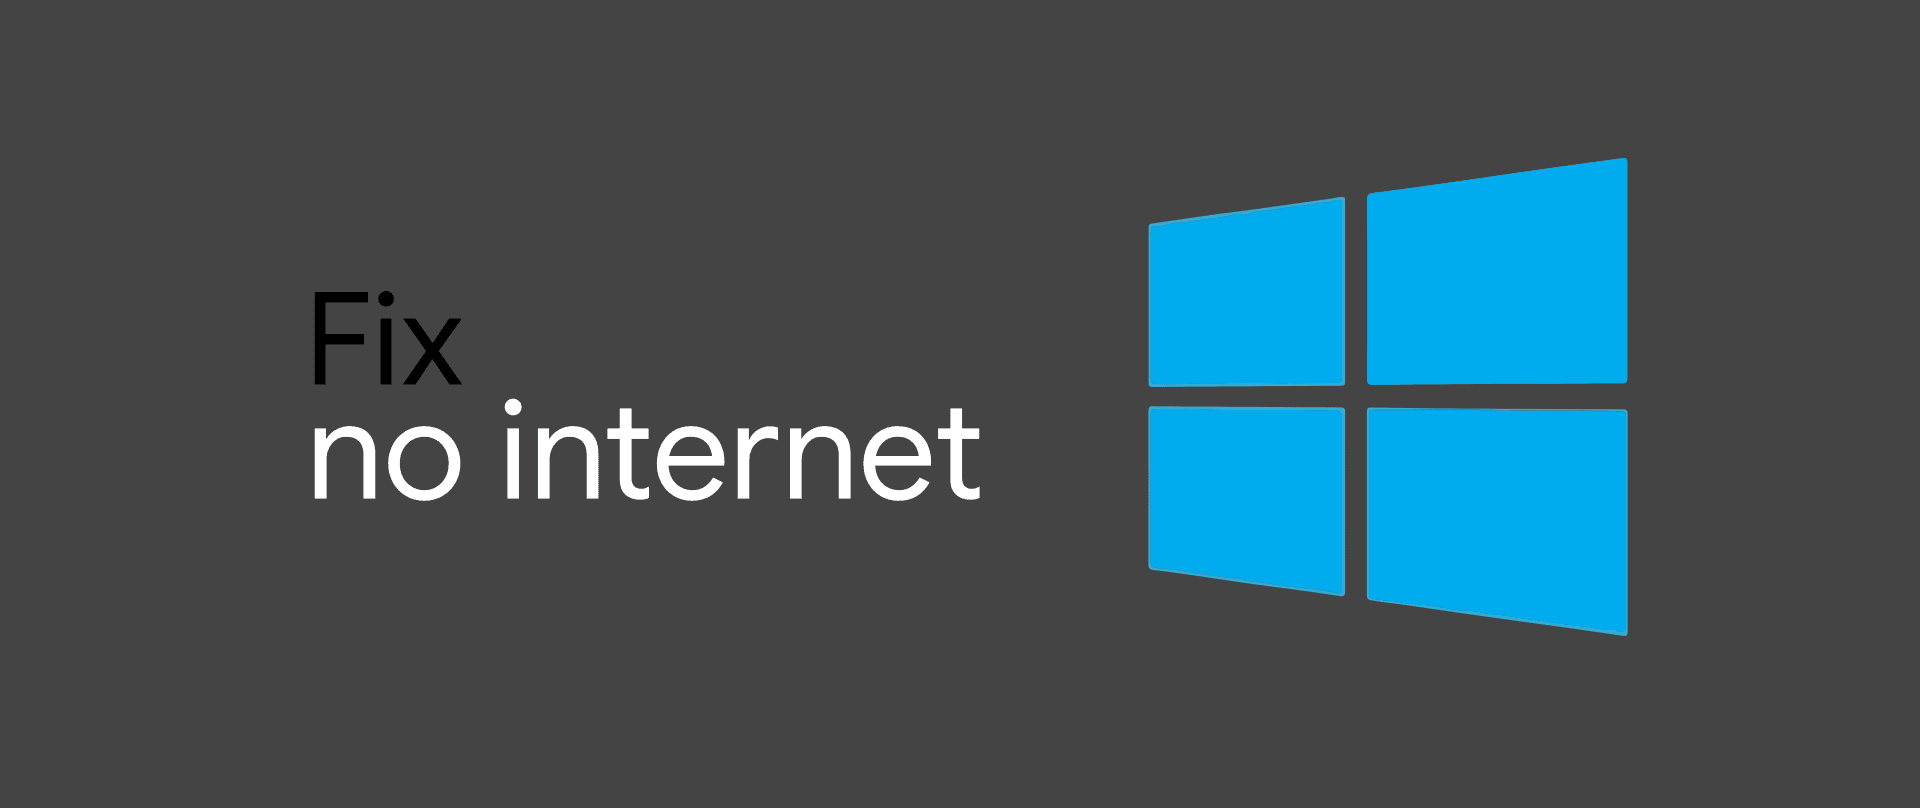 How to fix "No Internet Access" problem on Windows 10 after installing the KB4467702 update